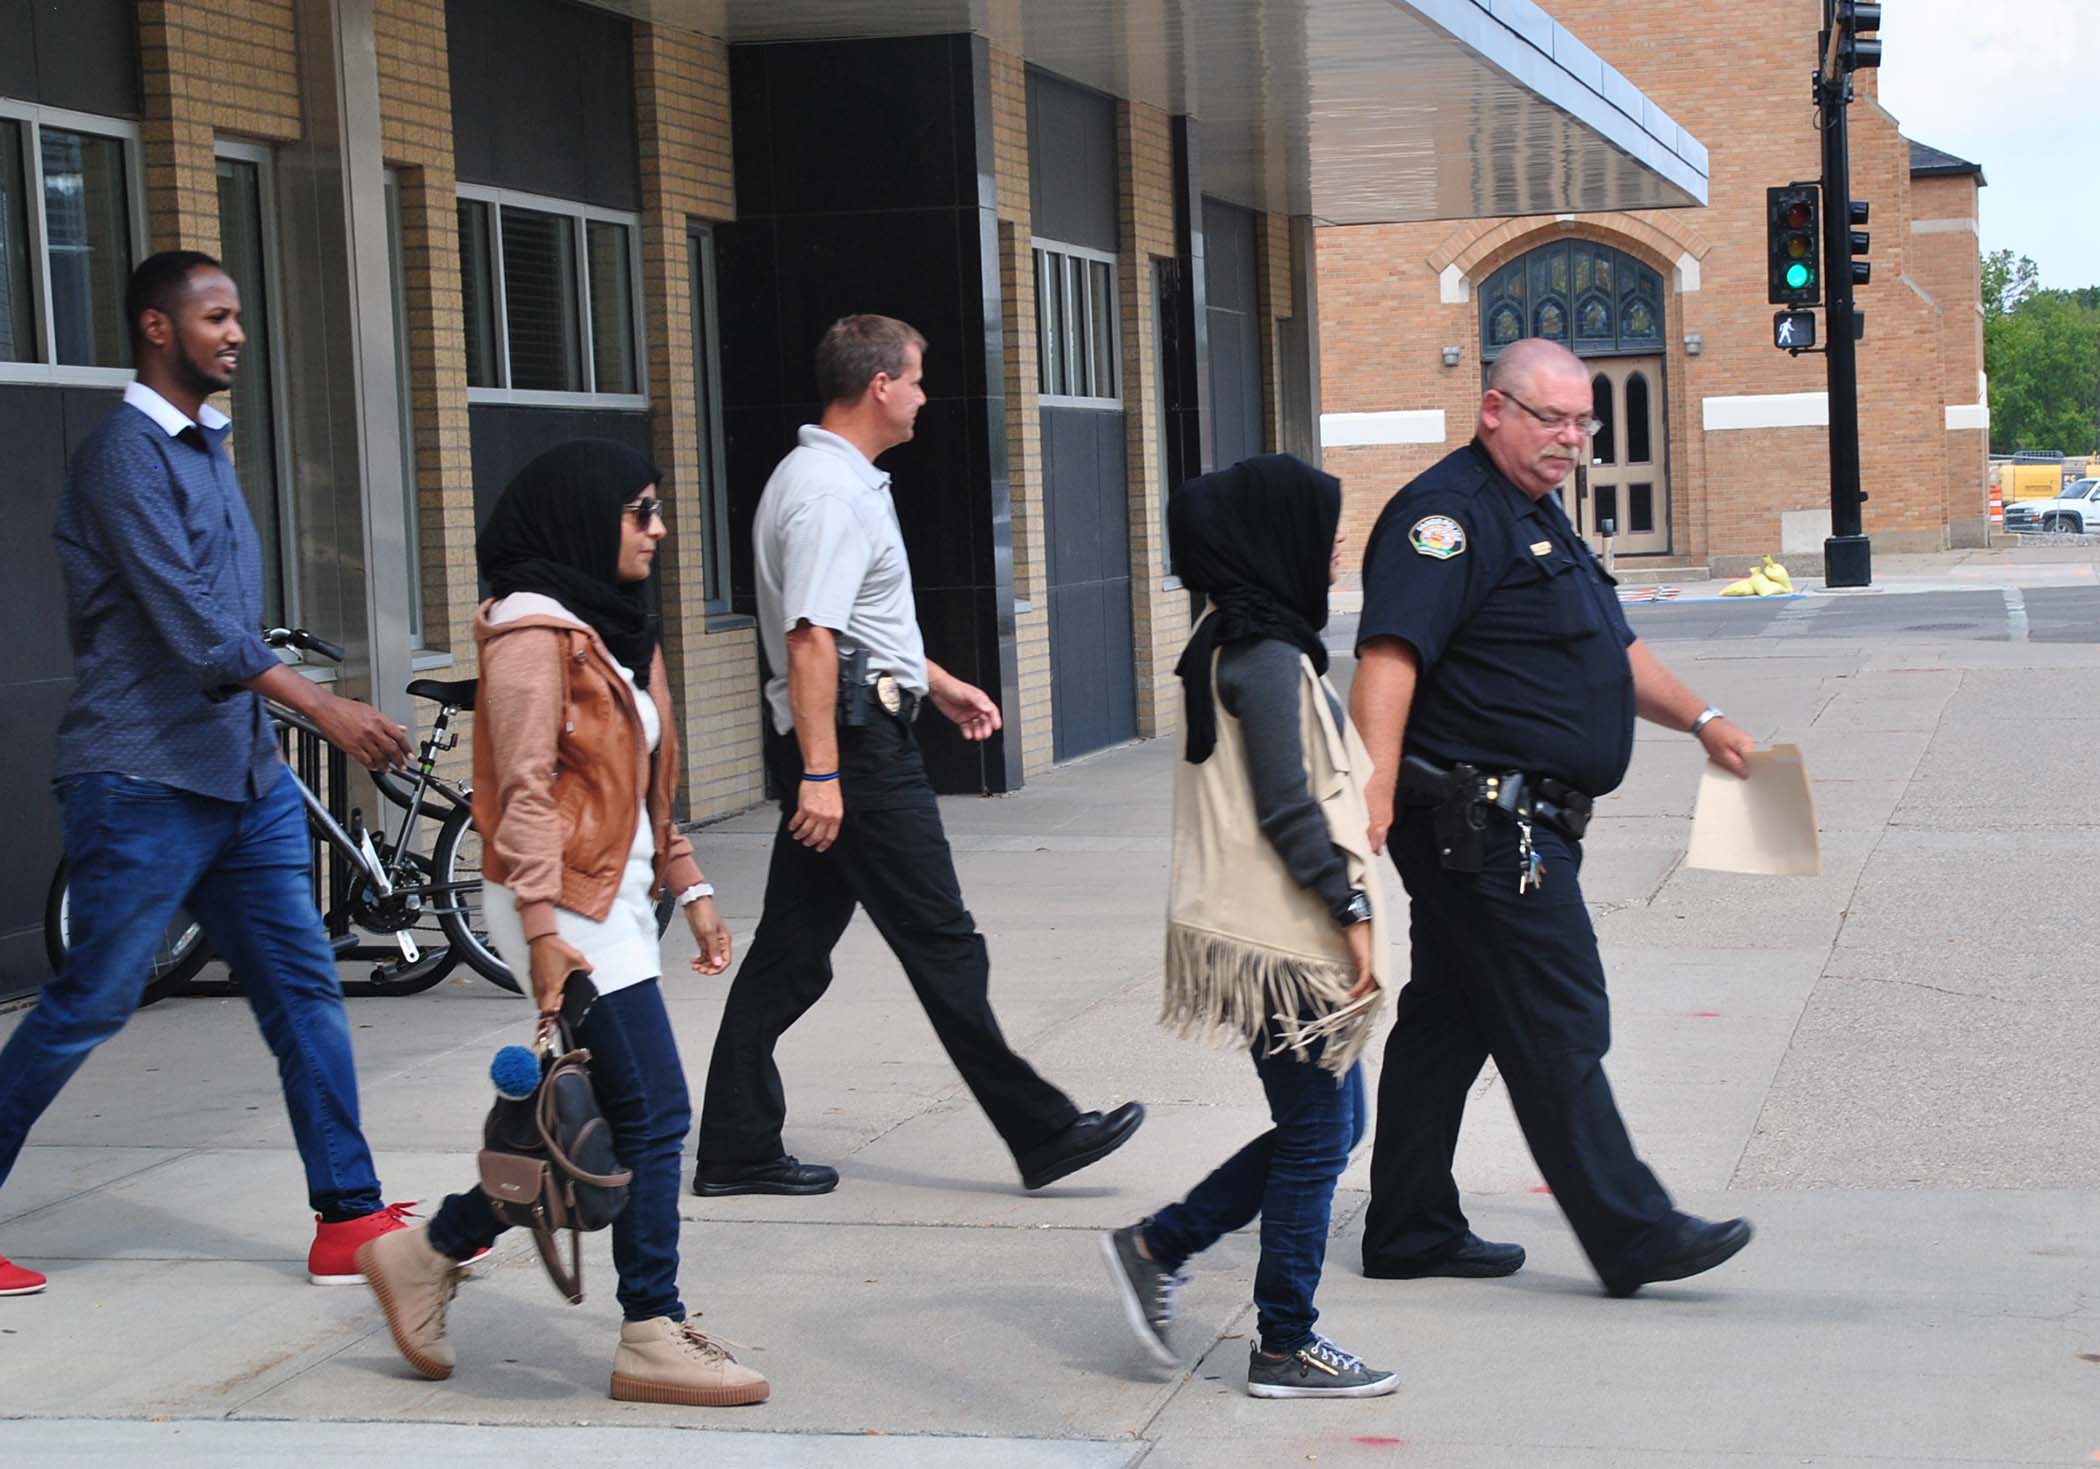 The Hassan sisters accompany police officers to a scheduled meeting with their attacker - photo by C.S. Hagen